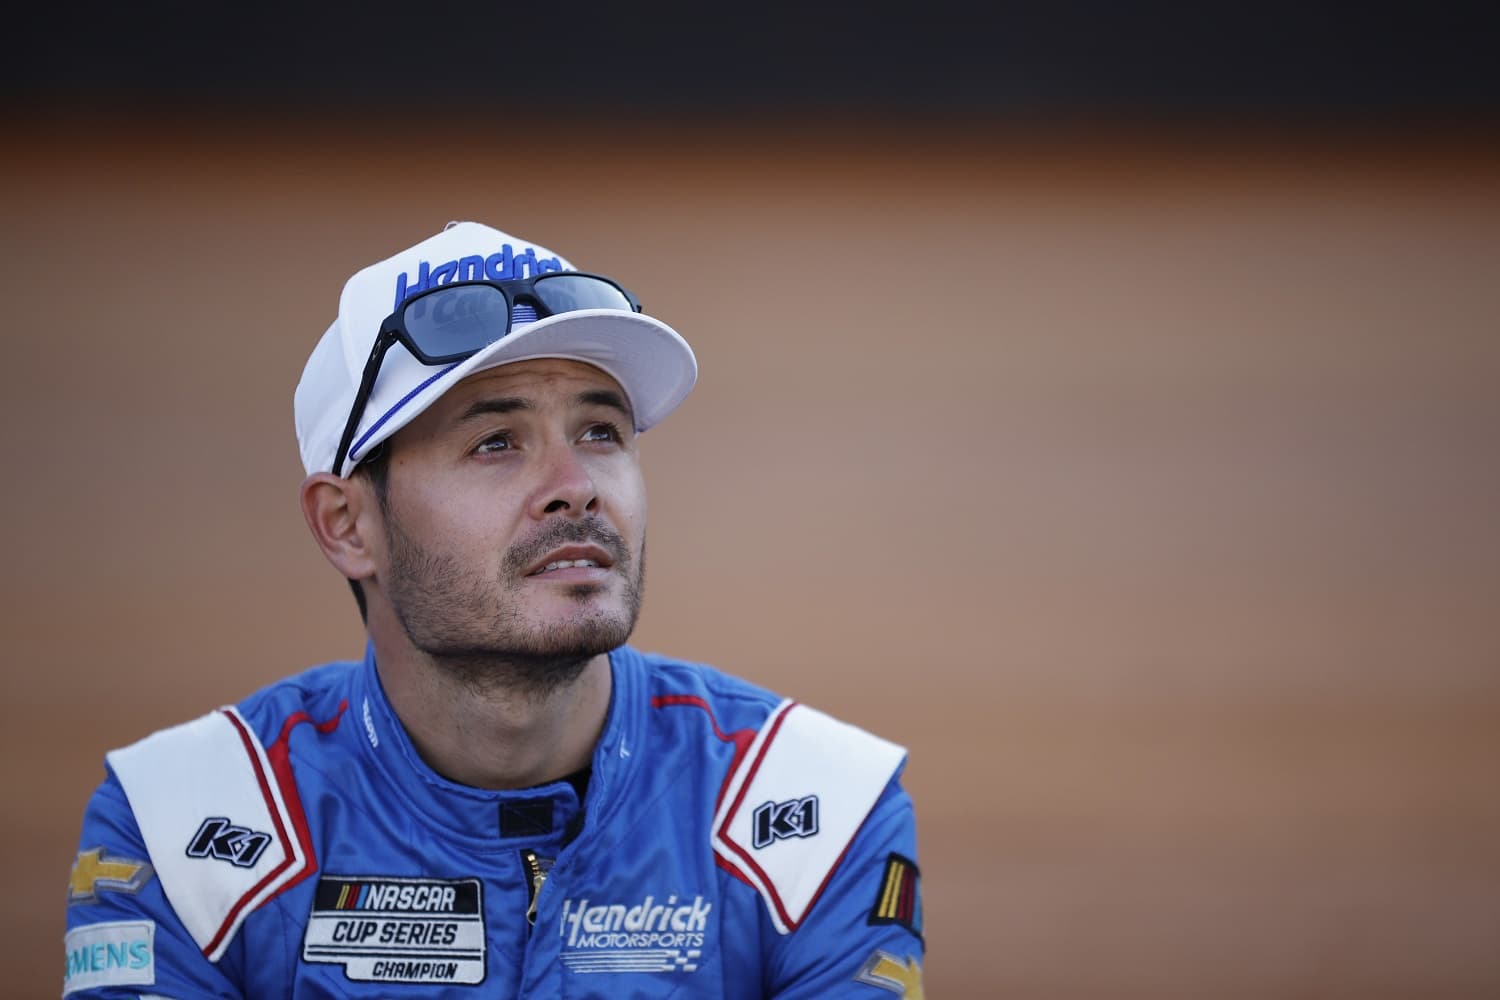 Kyle Larson waits on the grid prior to the NASCAR Cup Series Food City Dirt Race at Bristol Motor Speedway on April 9, 2023, in Bristol, Tennessee.